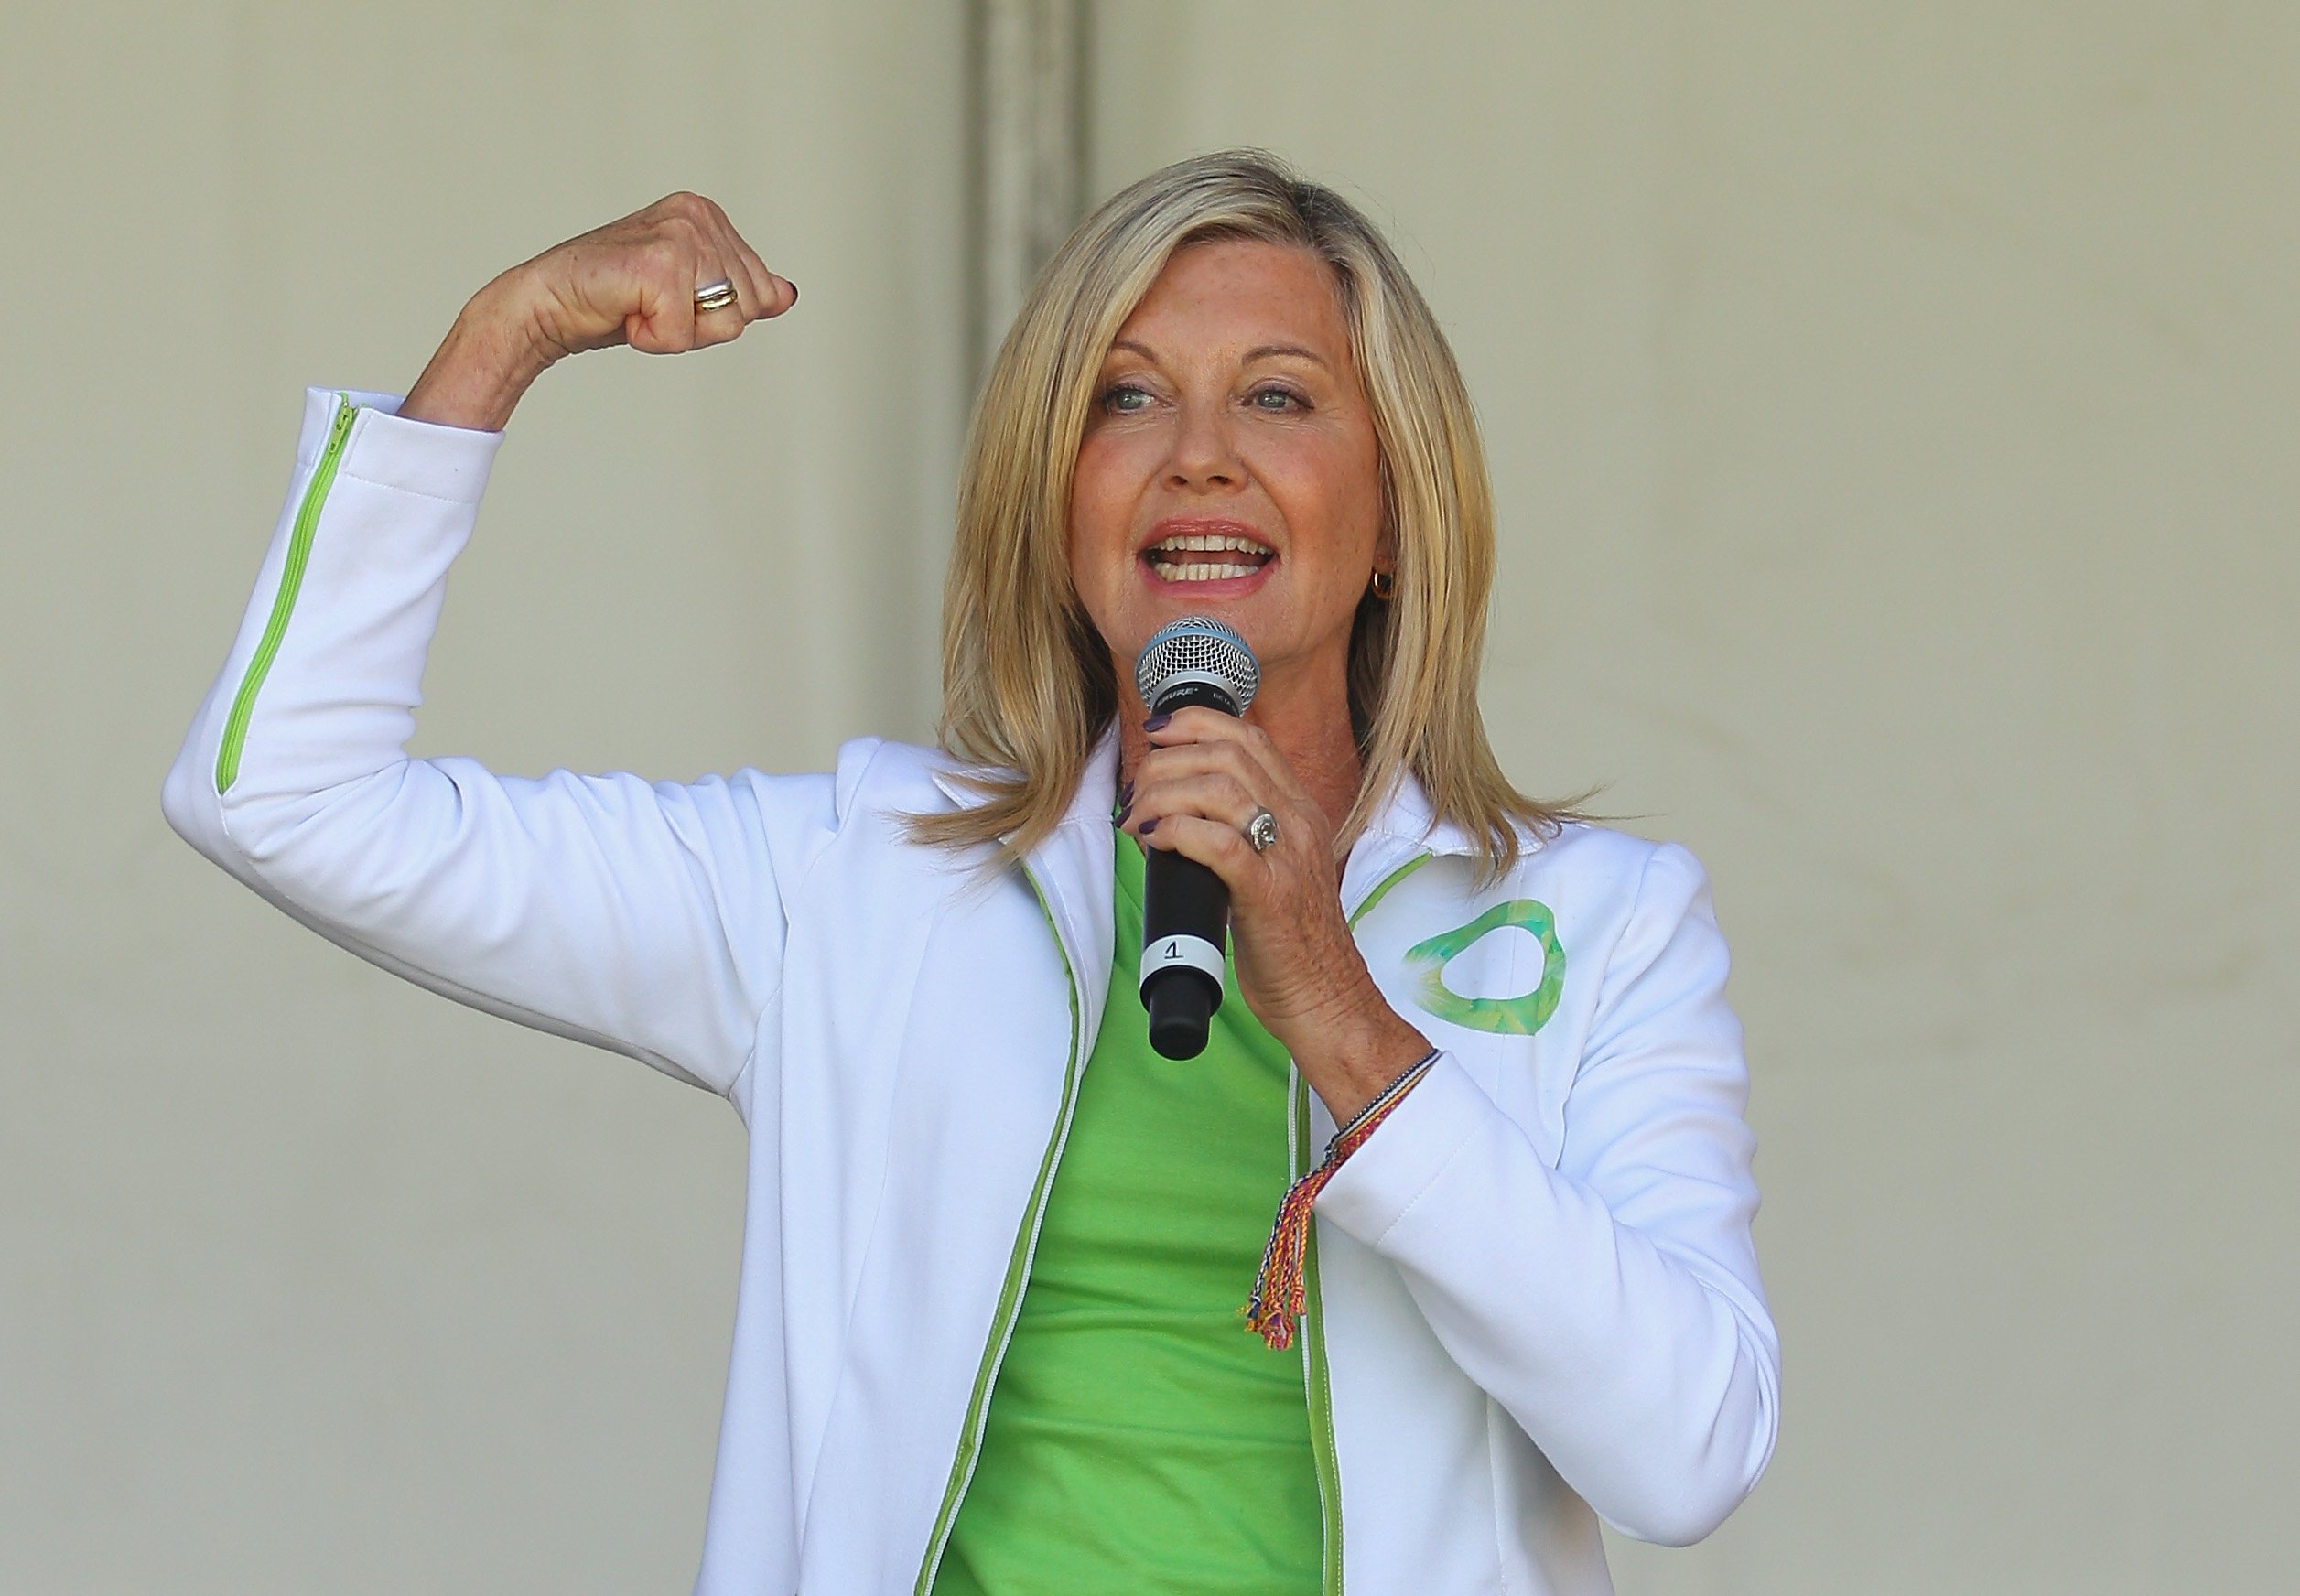 Olivia Newton-John performs her song "Physical" on stage before leading the inaugural Wellness Walk on September 15, 2013, in Melbourne, Australia. | Source: Getty Images